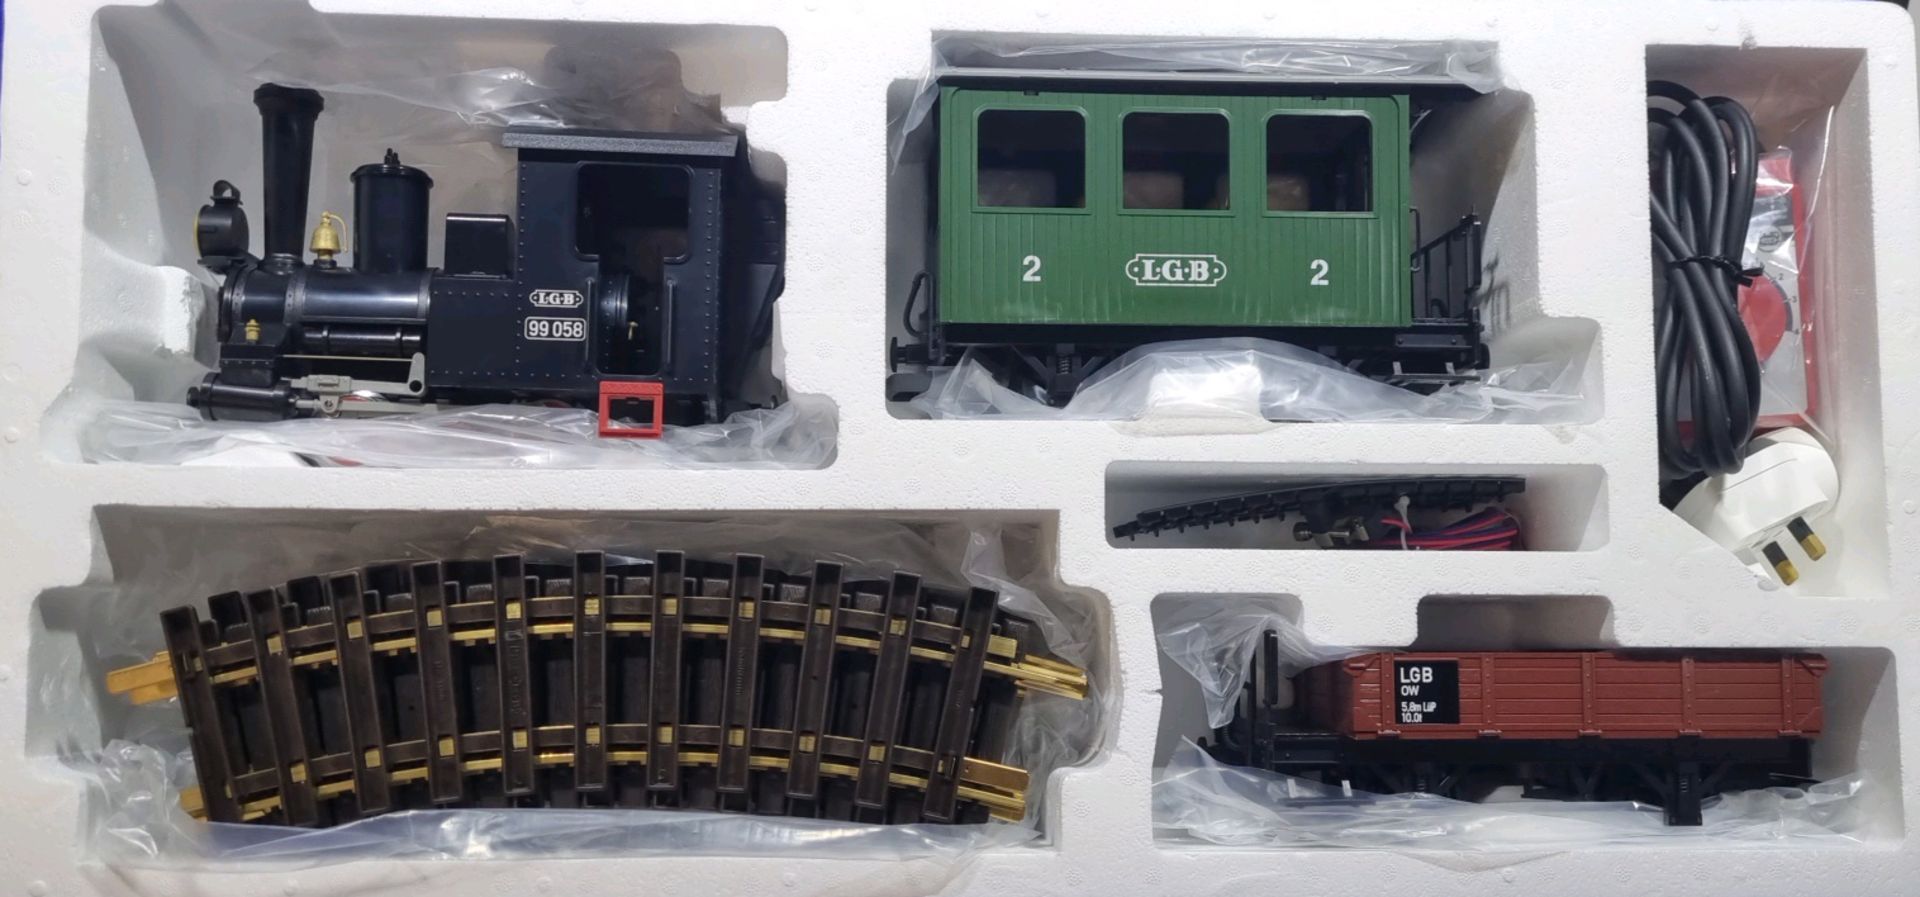 1 x LGB G Scale Trainset Starter Pack SKU70502 RRP £293.00 - Image 2 of 7